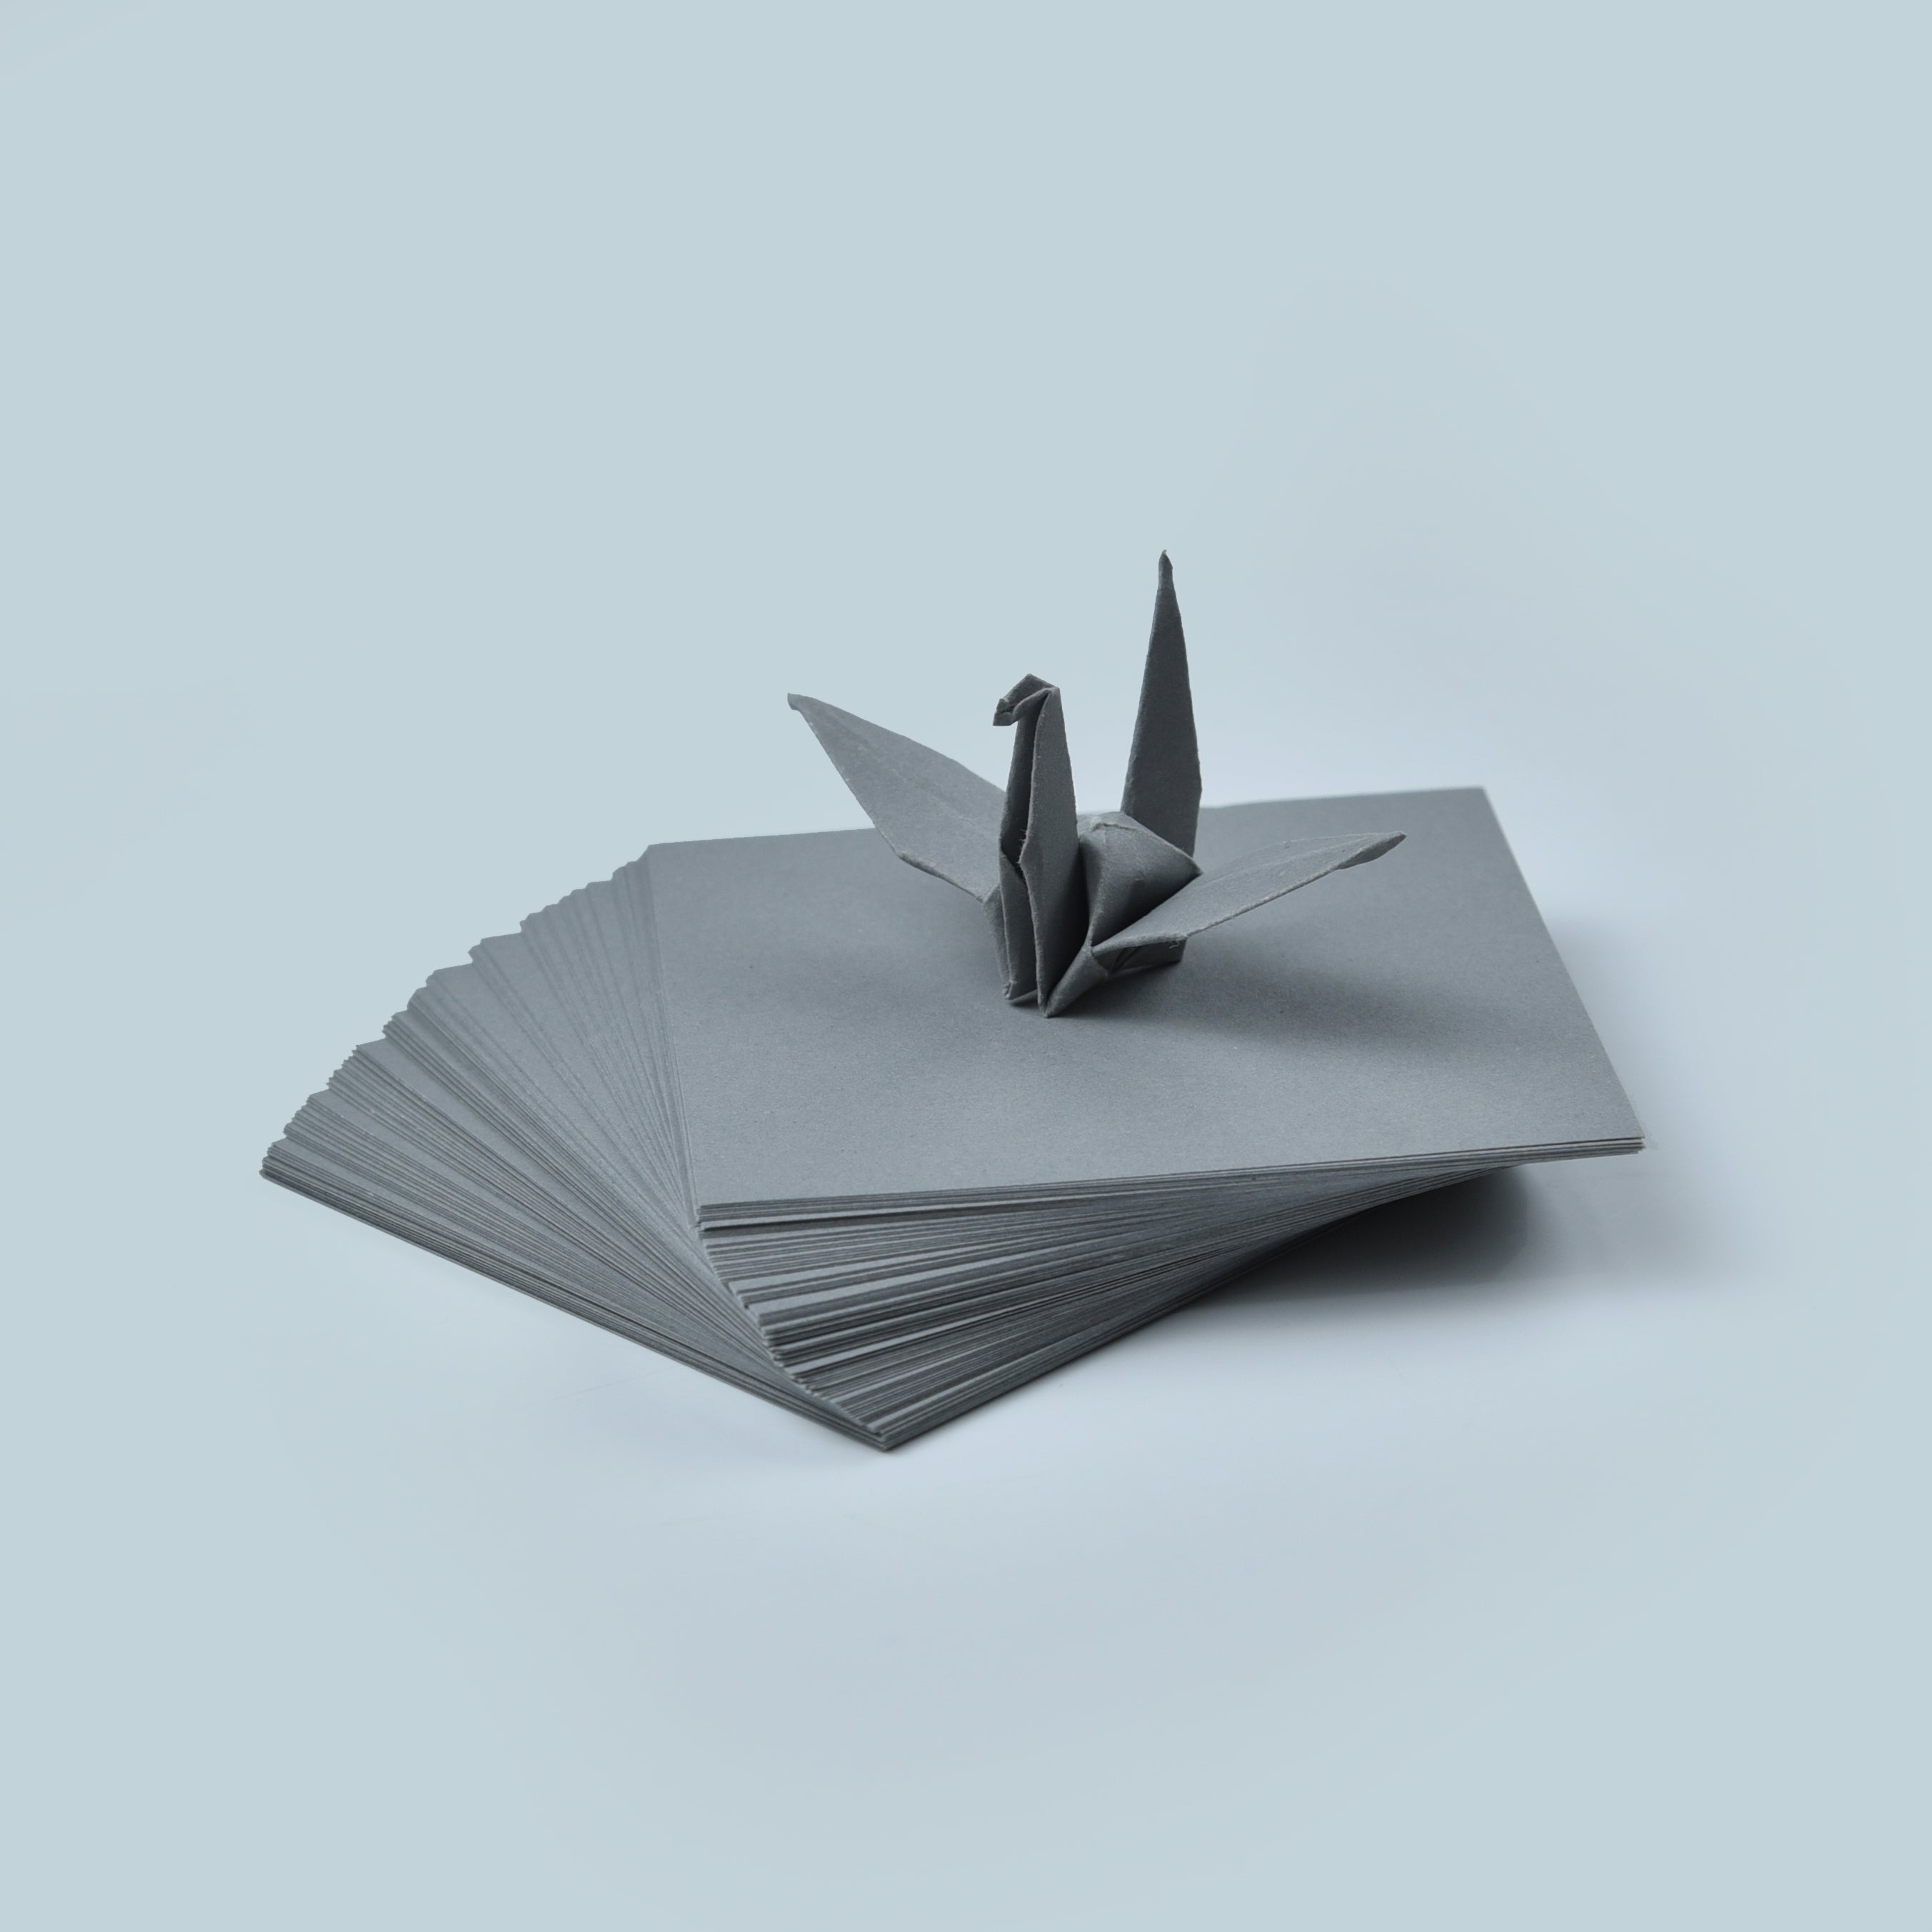 100 Gray Origami Paper Sheets 3x3 inches Square Paper Pack for Folding, Origami Cranes, and Decoration - S10